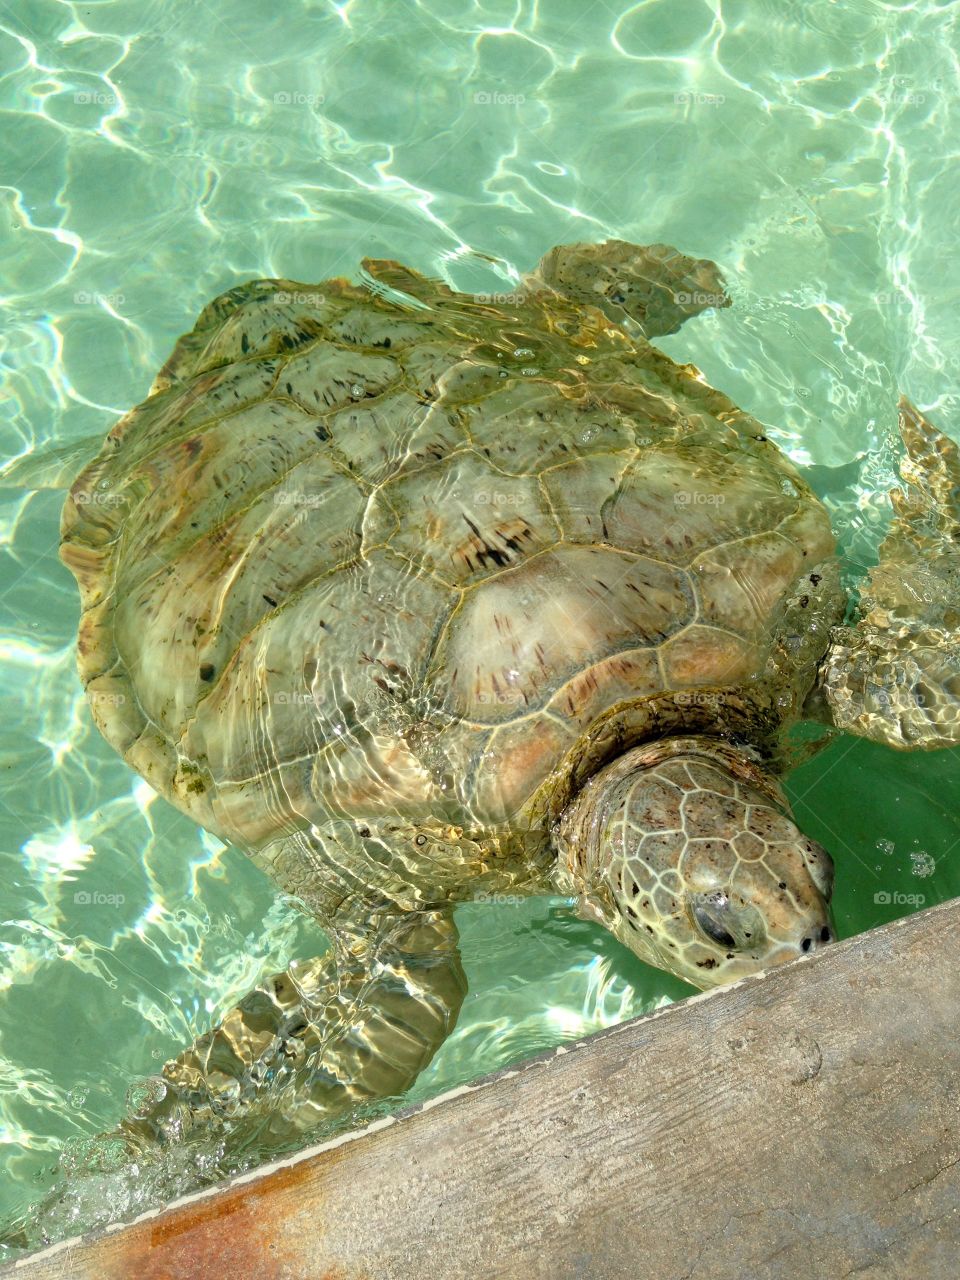 Turtle, Reptile, Water, Nature, Shell